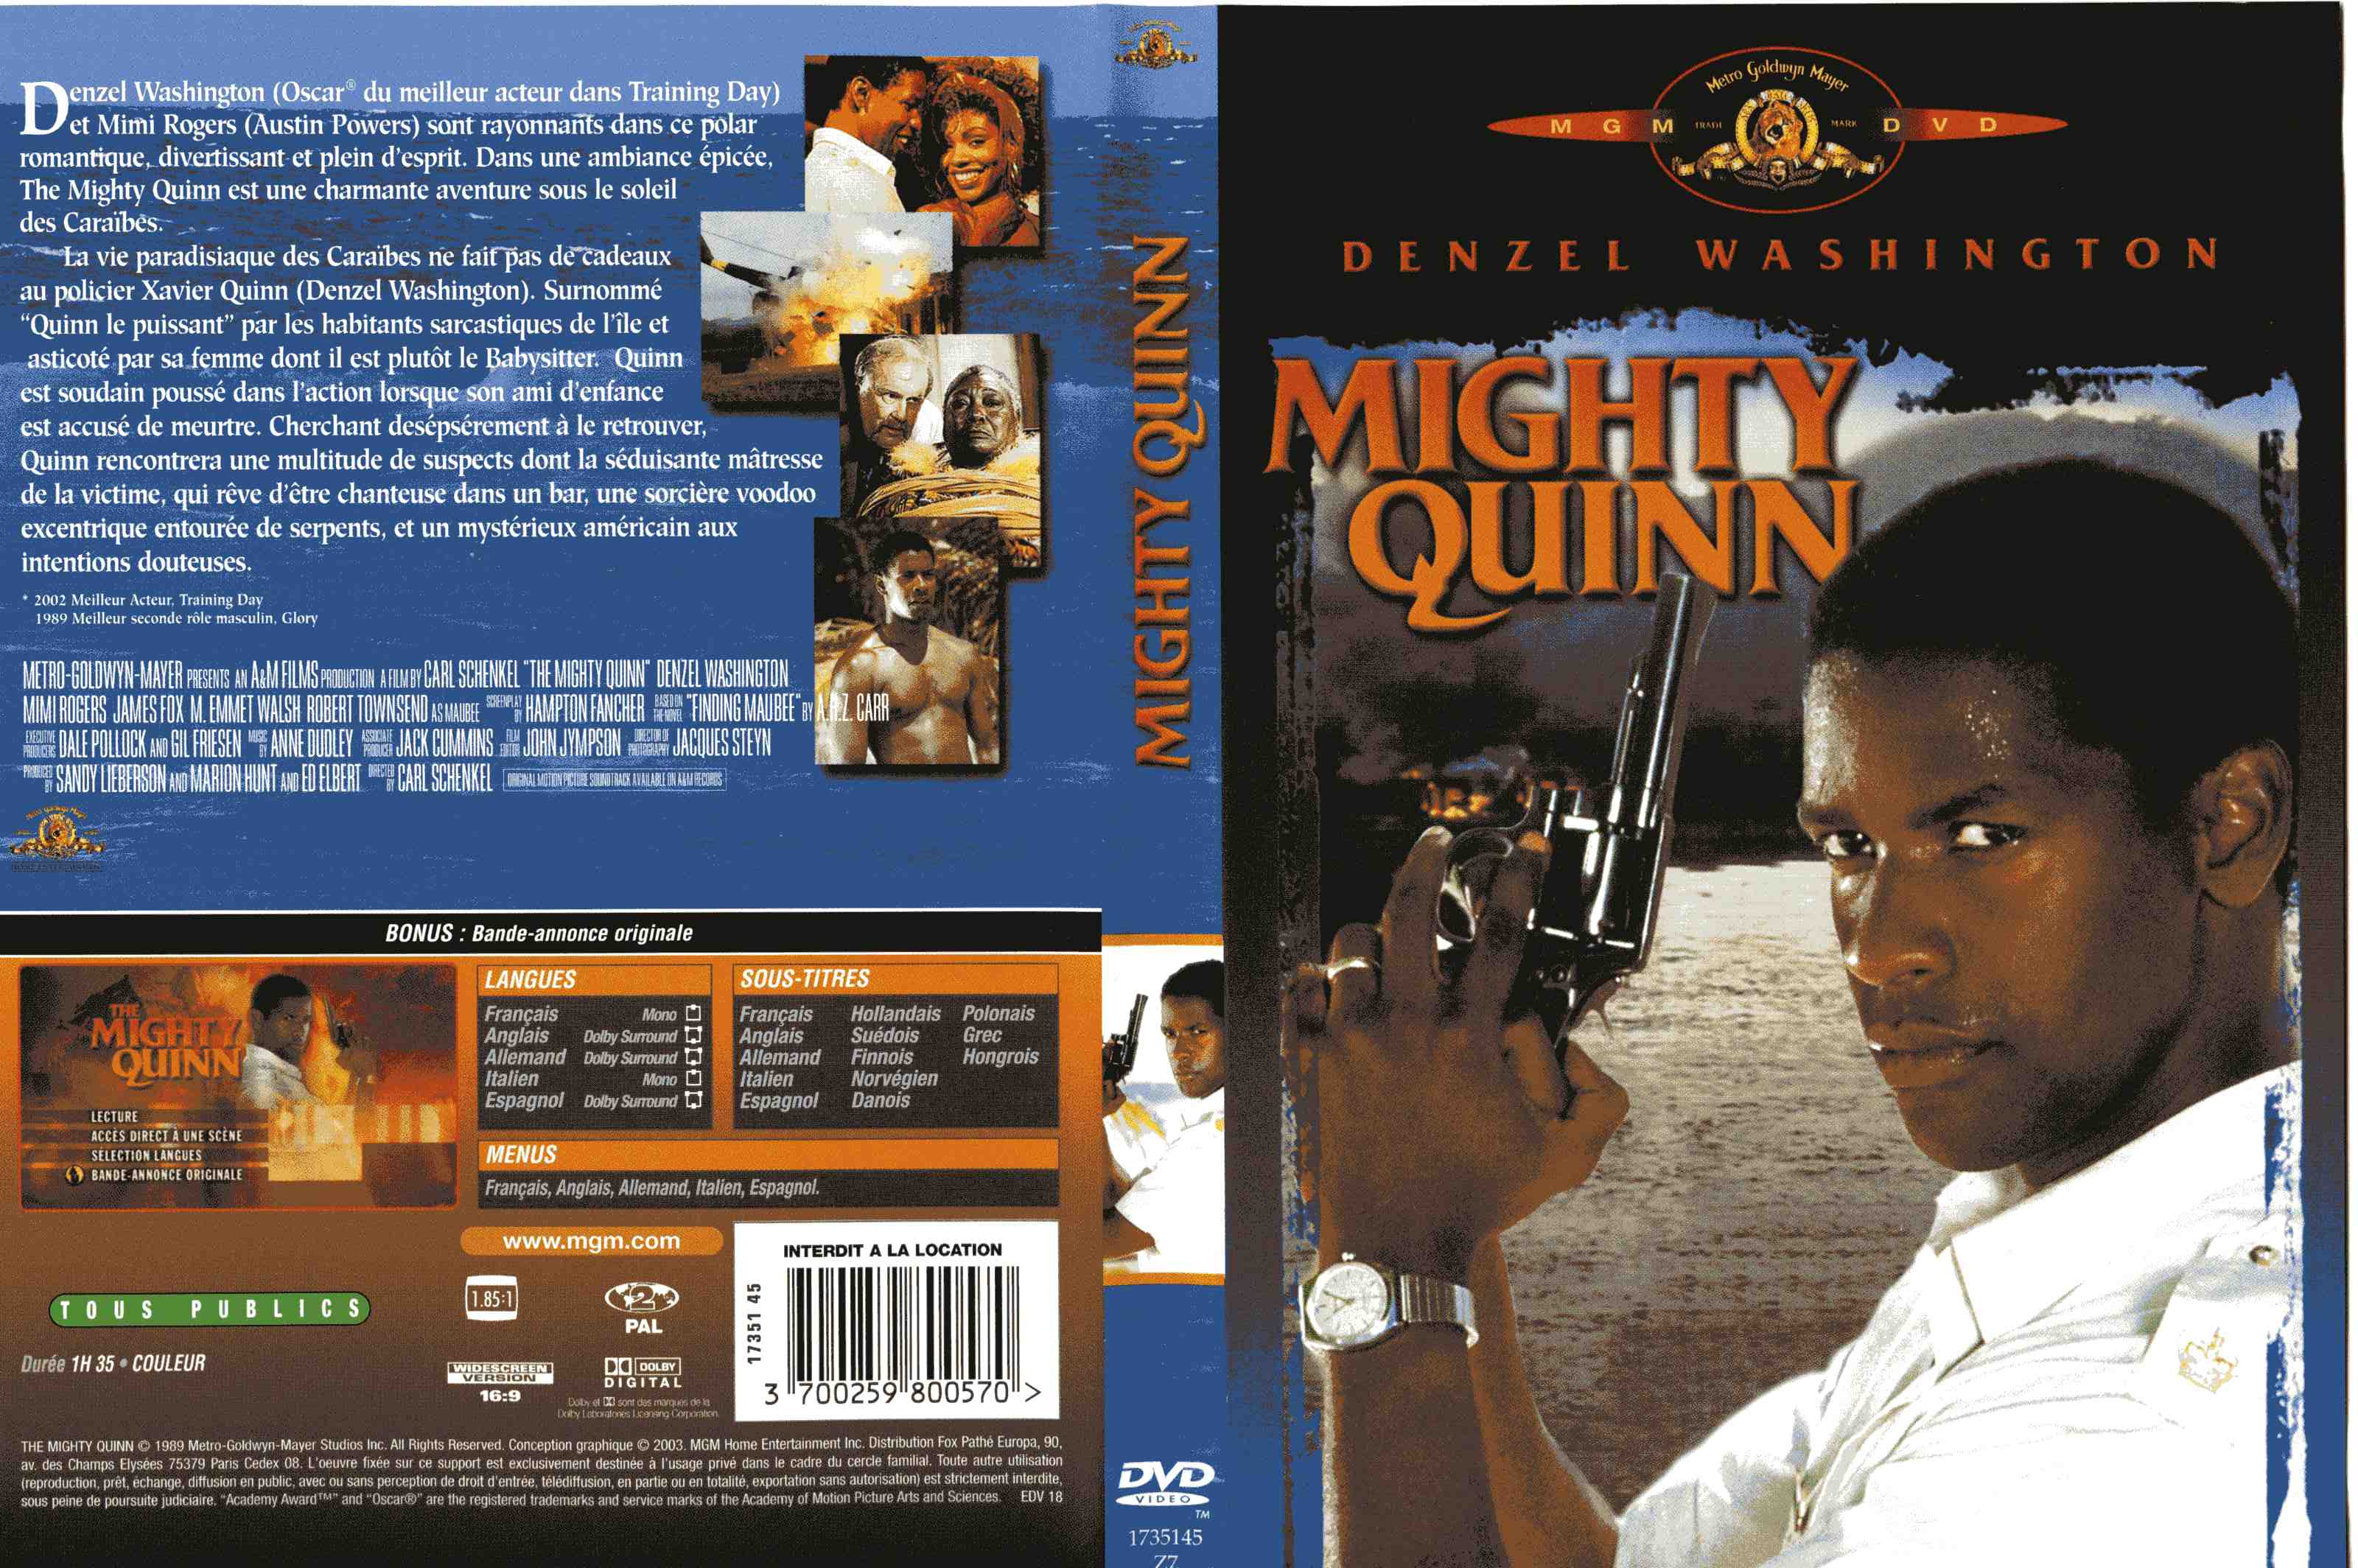 Jaquette DVD Mighty Quinn